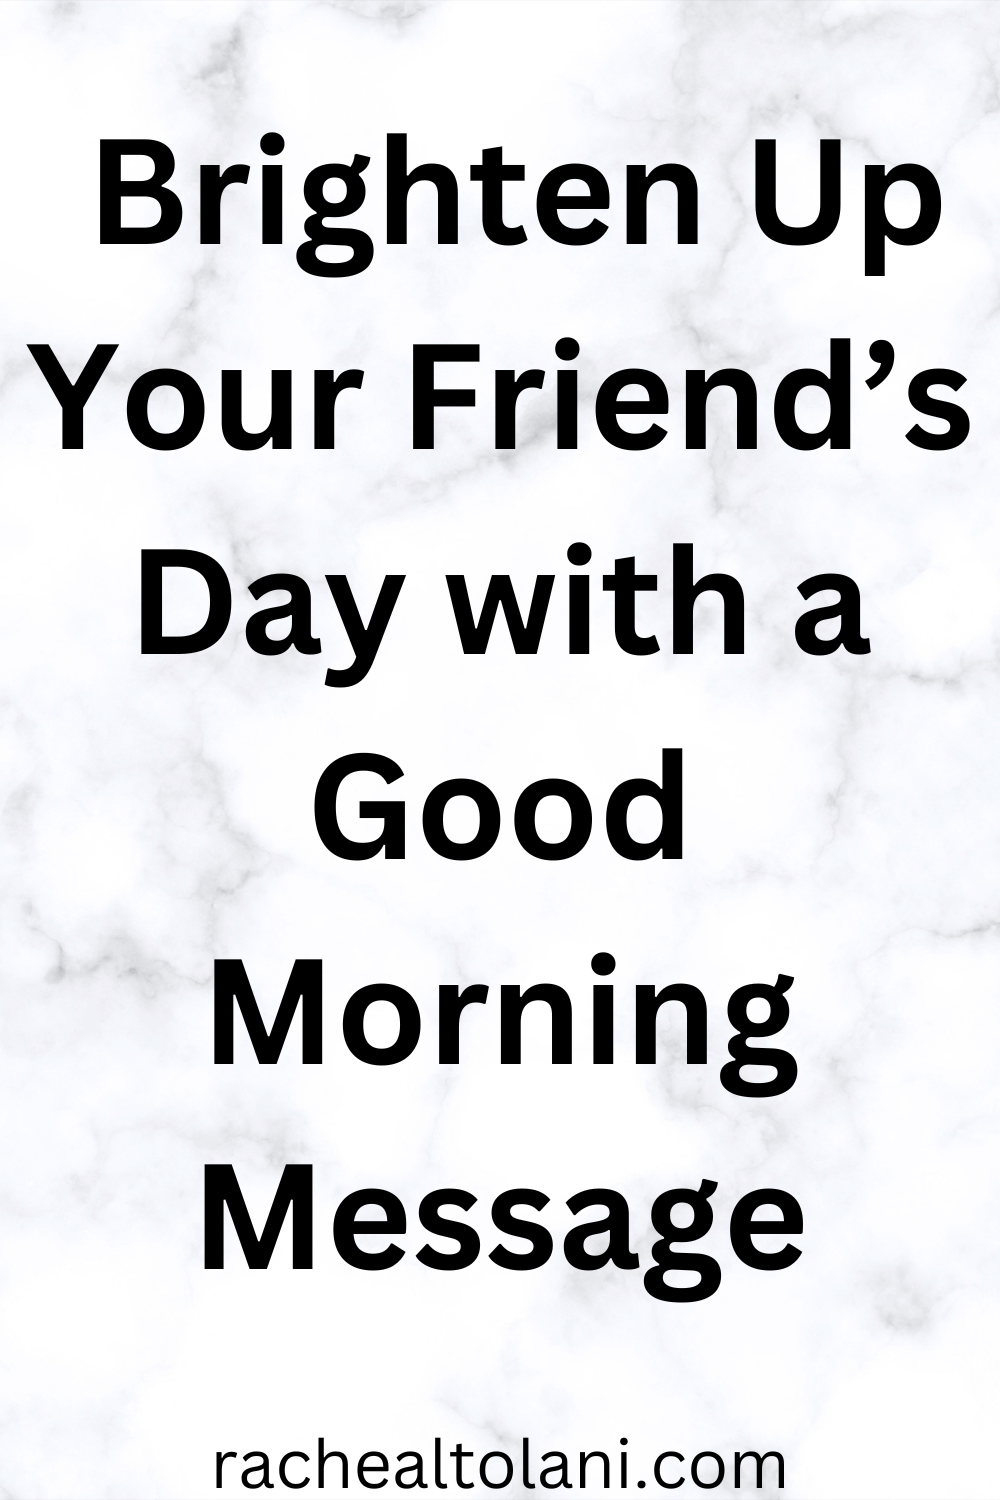 67 Wonderful Good Morning Messages For Friends -